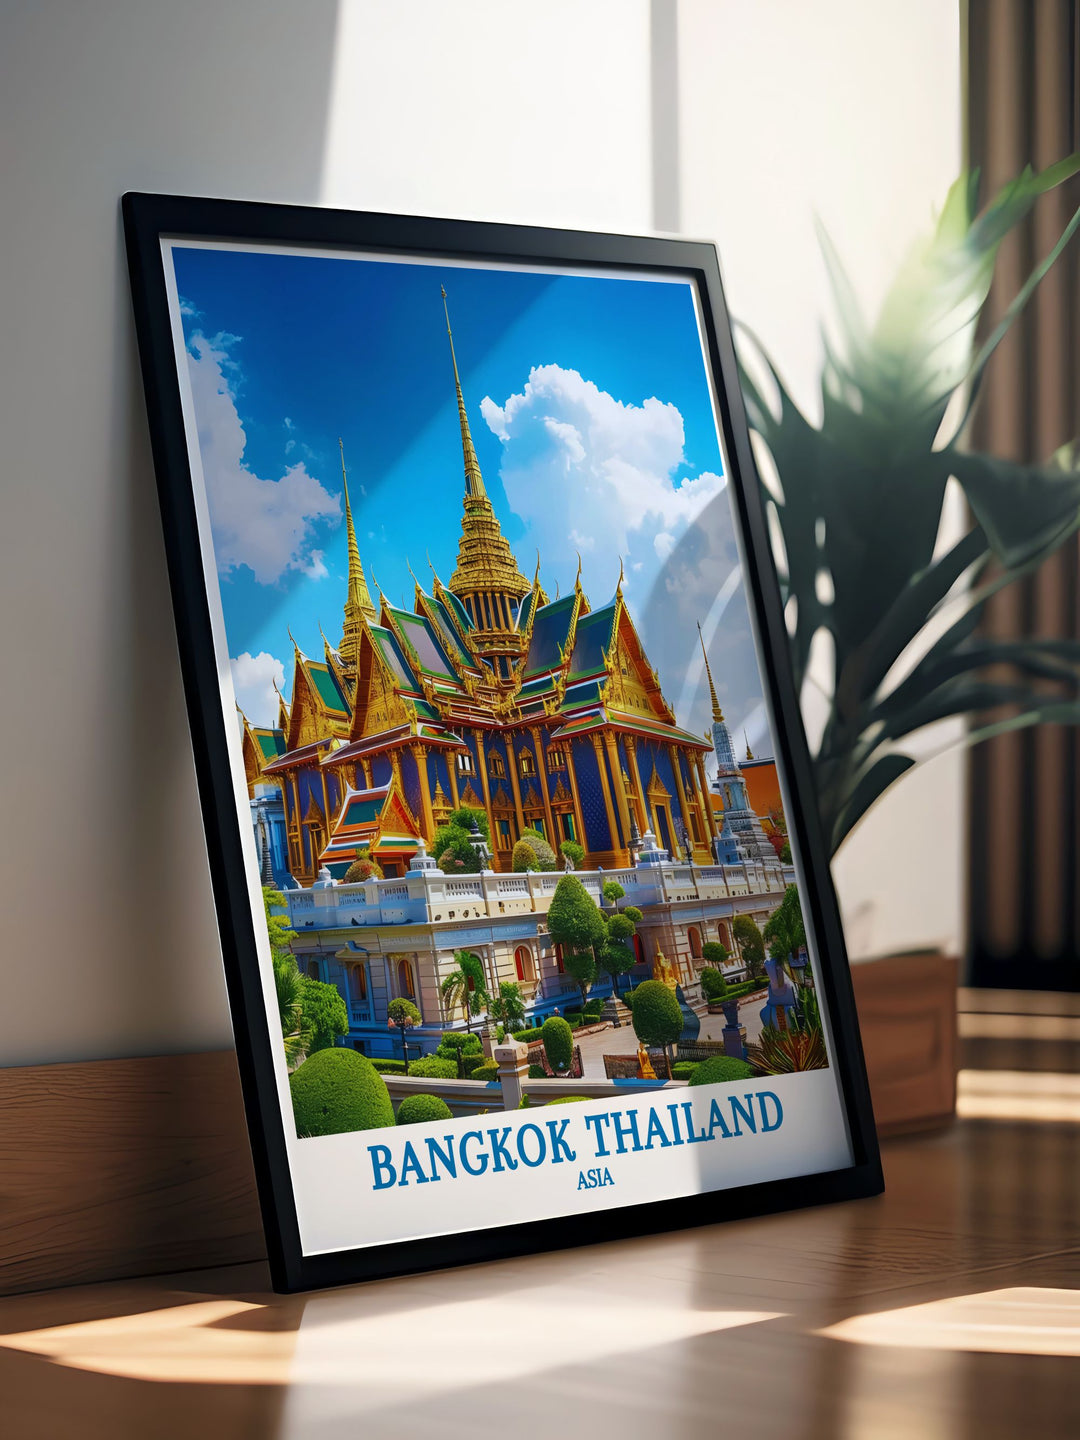 Custom print of Bangkoks Grand Palace at dusk, showing the palace illuminated against the evening sky, offering a majestic view for art lovers.